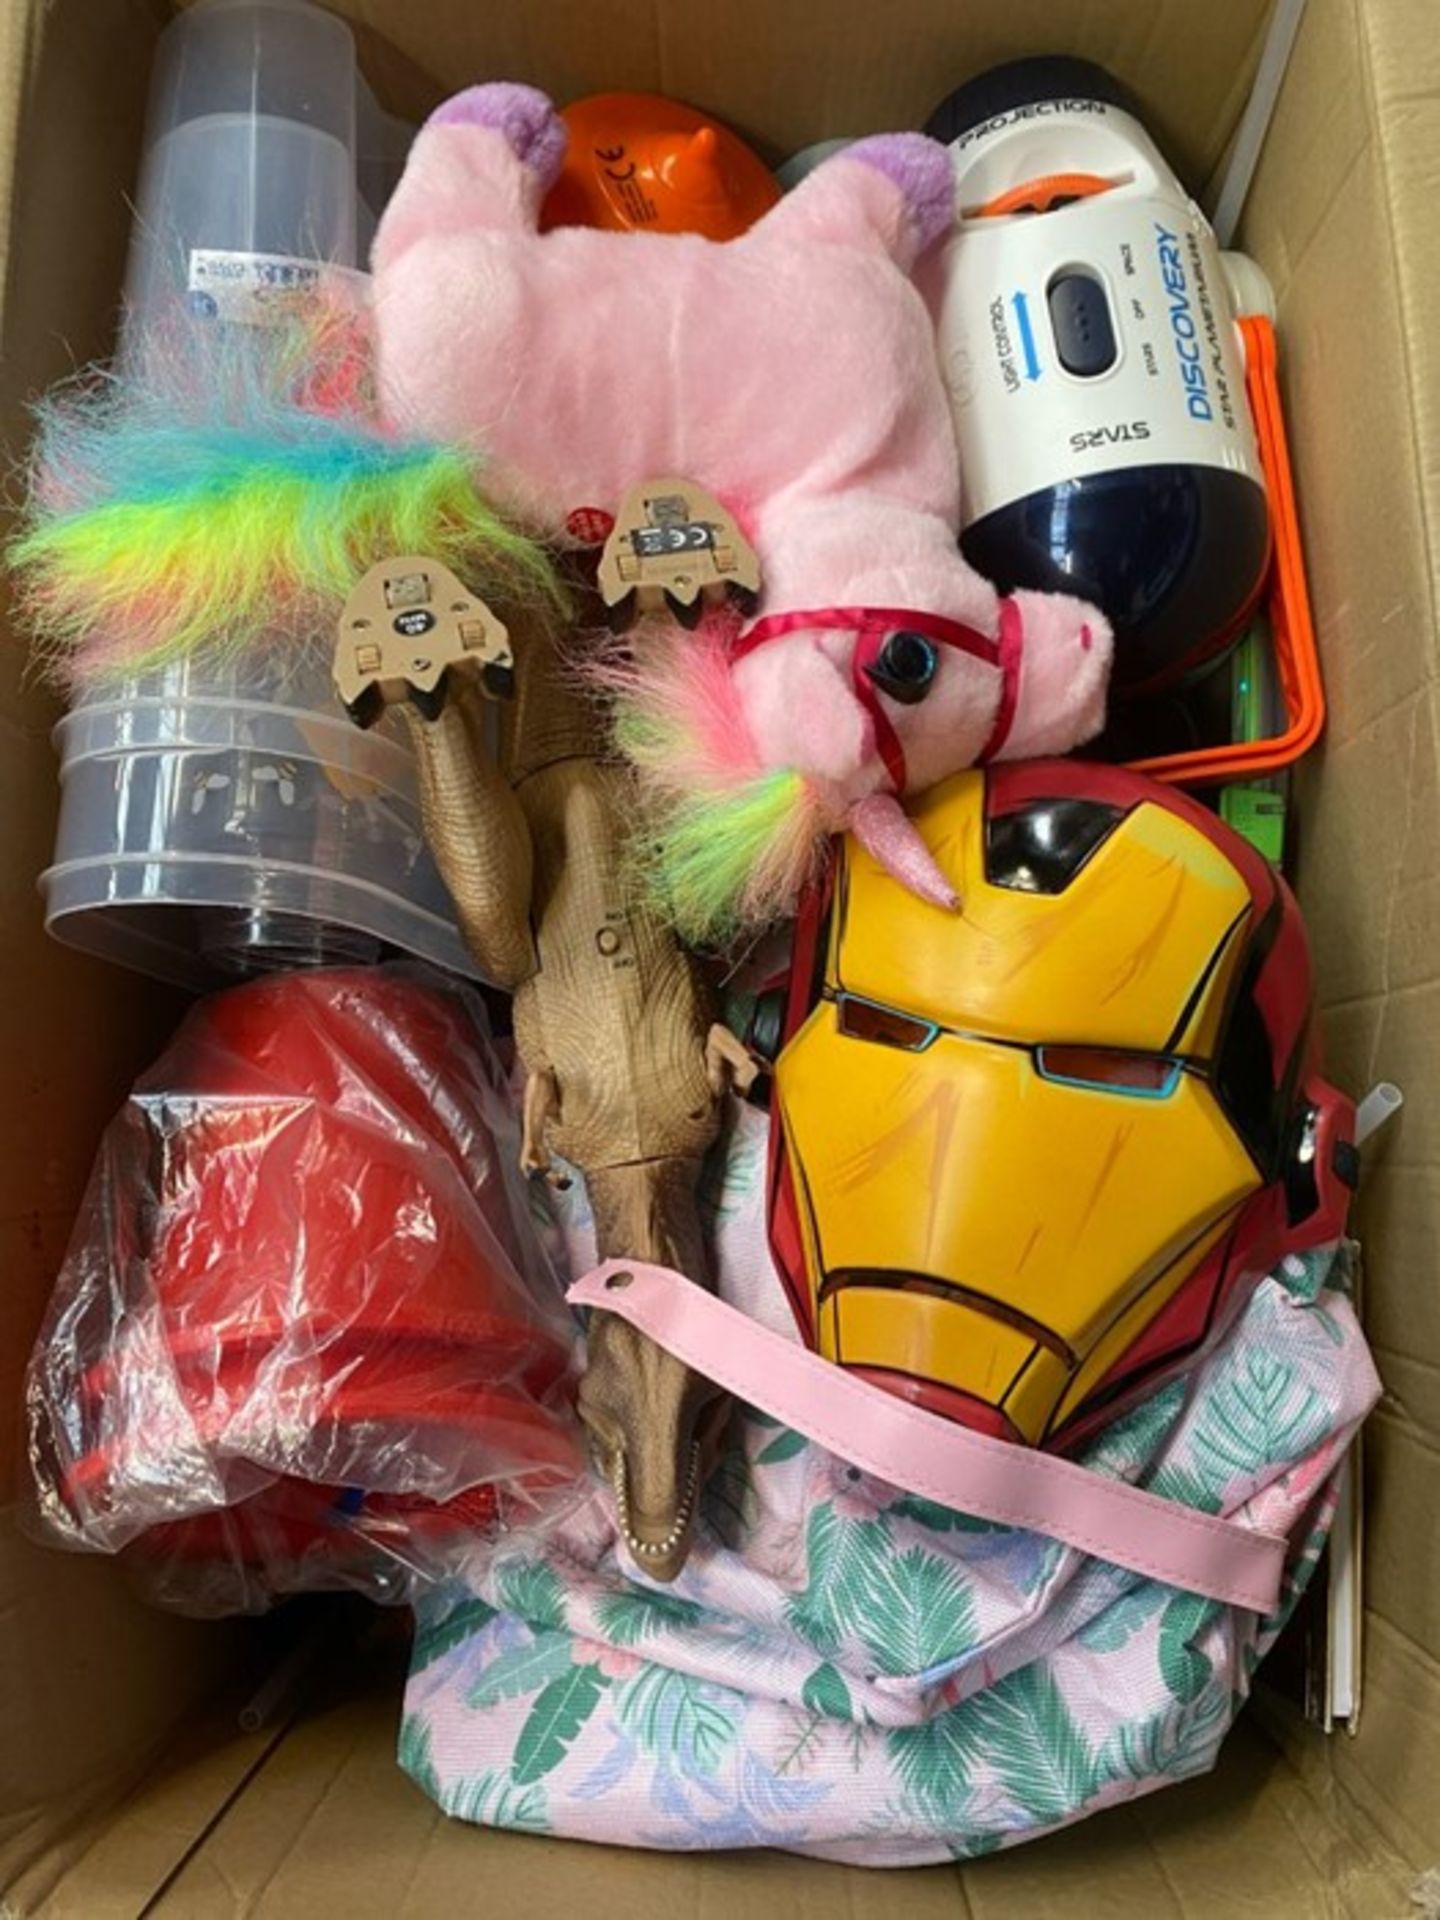 ONE LOT TO CONTAIN AN ASSORTMENT OF TOYS (CUSTOMER RETURNS UNTESTED BY DMR)